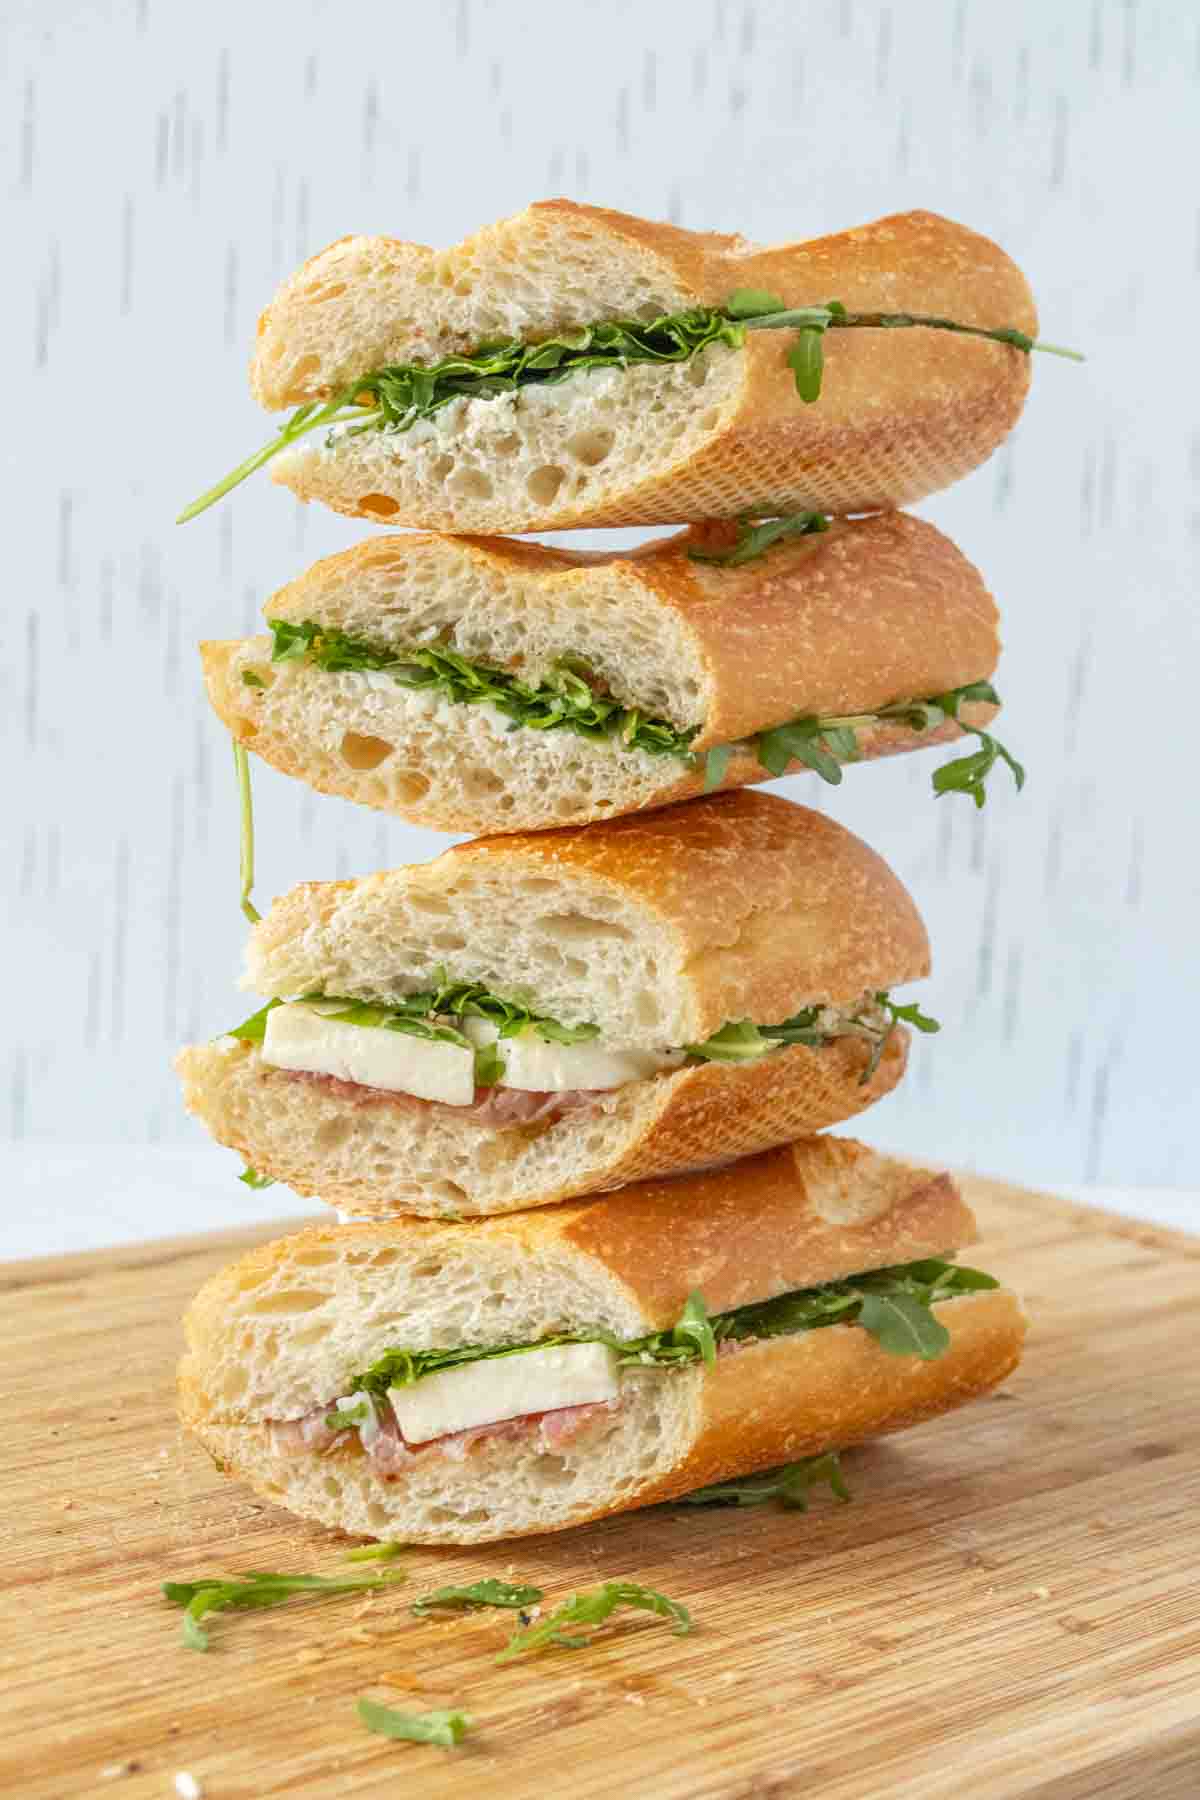 A stack of sandwiches on a wooden cutting board.